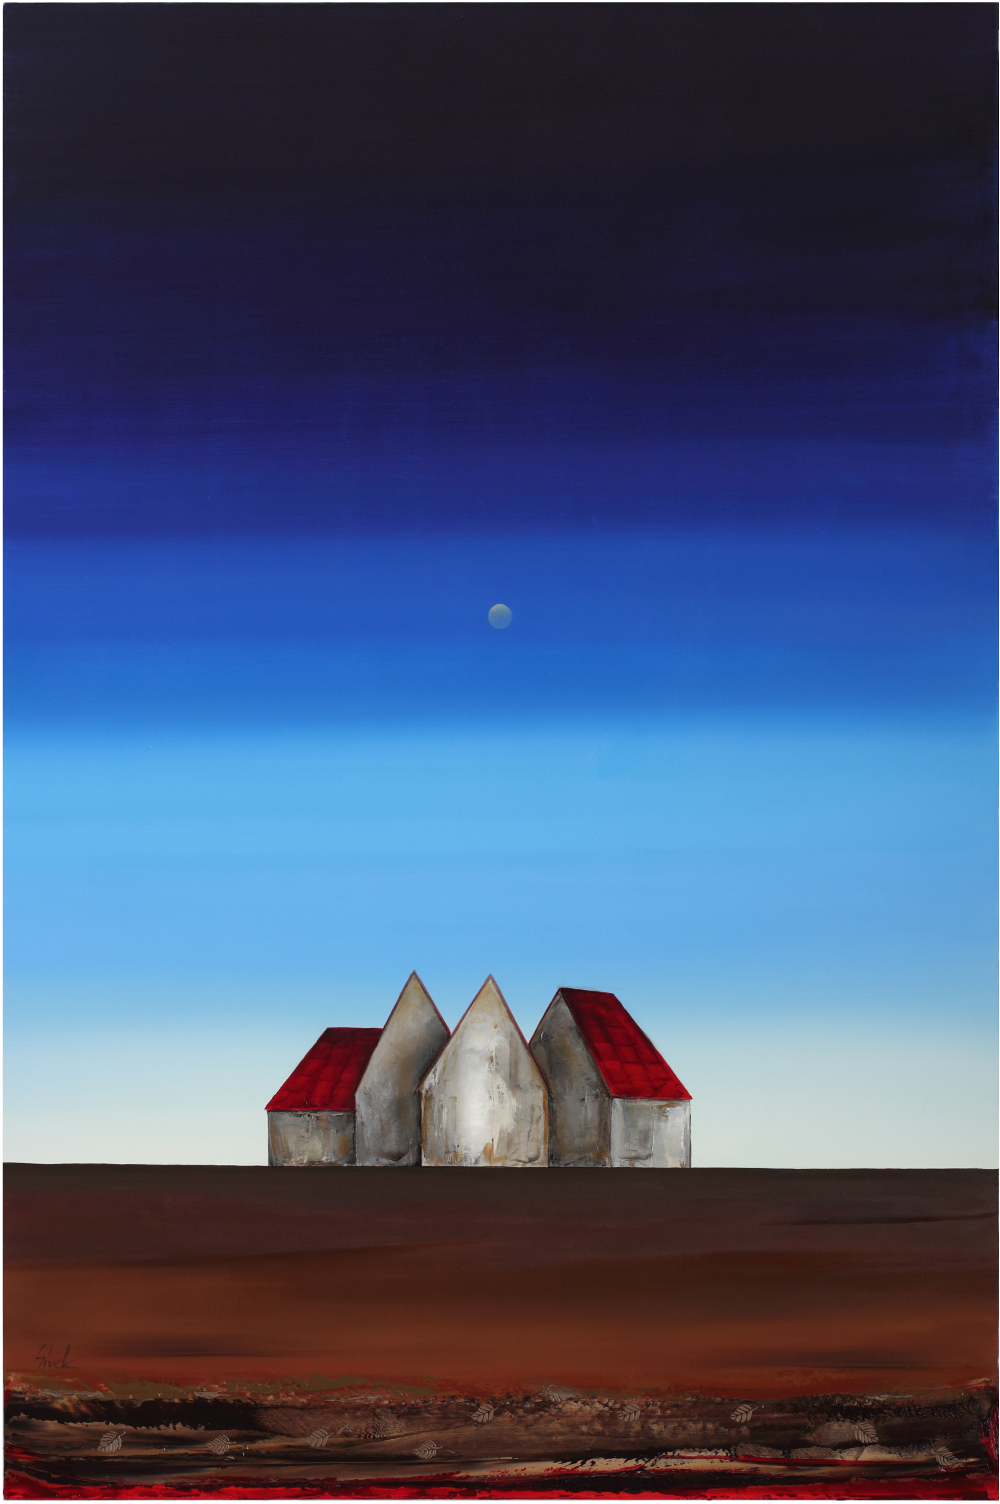 "Tonight" (Four Barns / Red Fields)